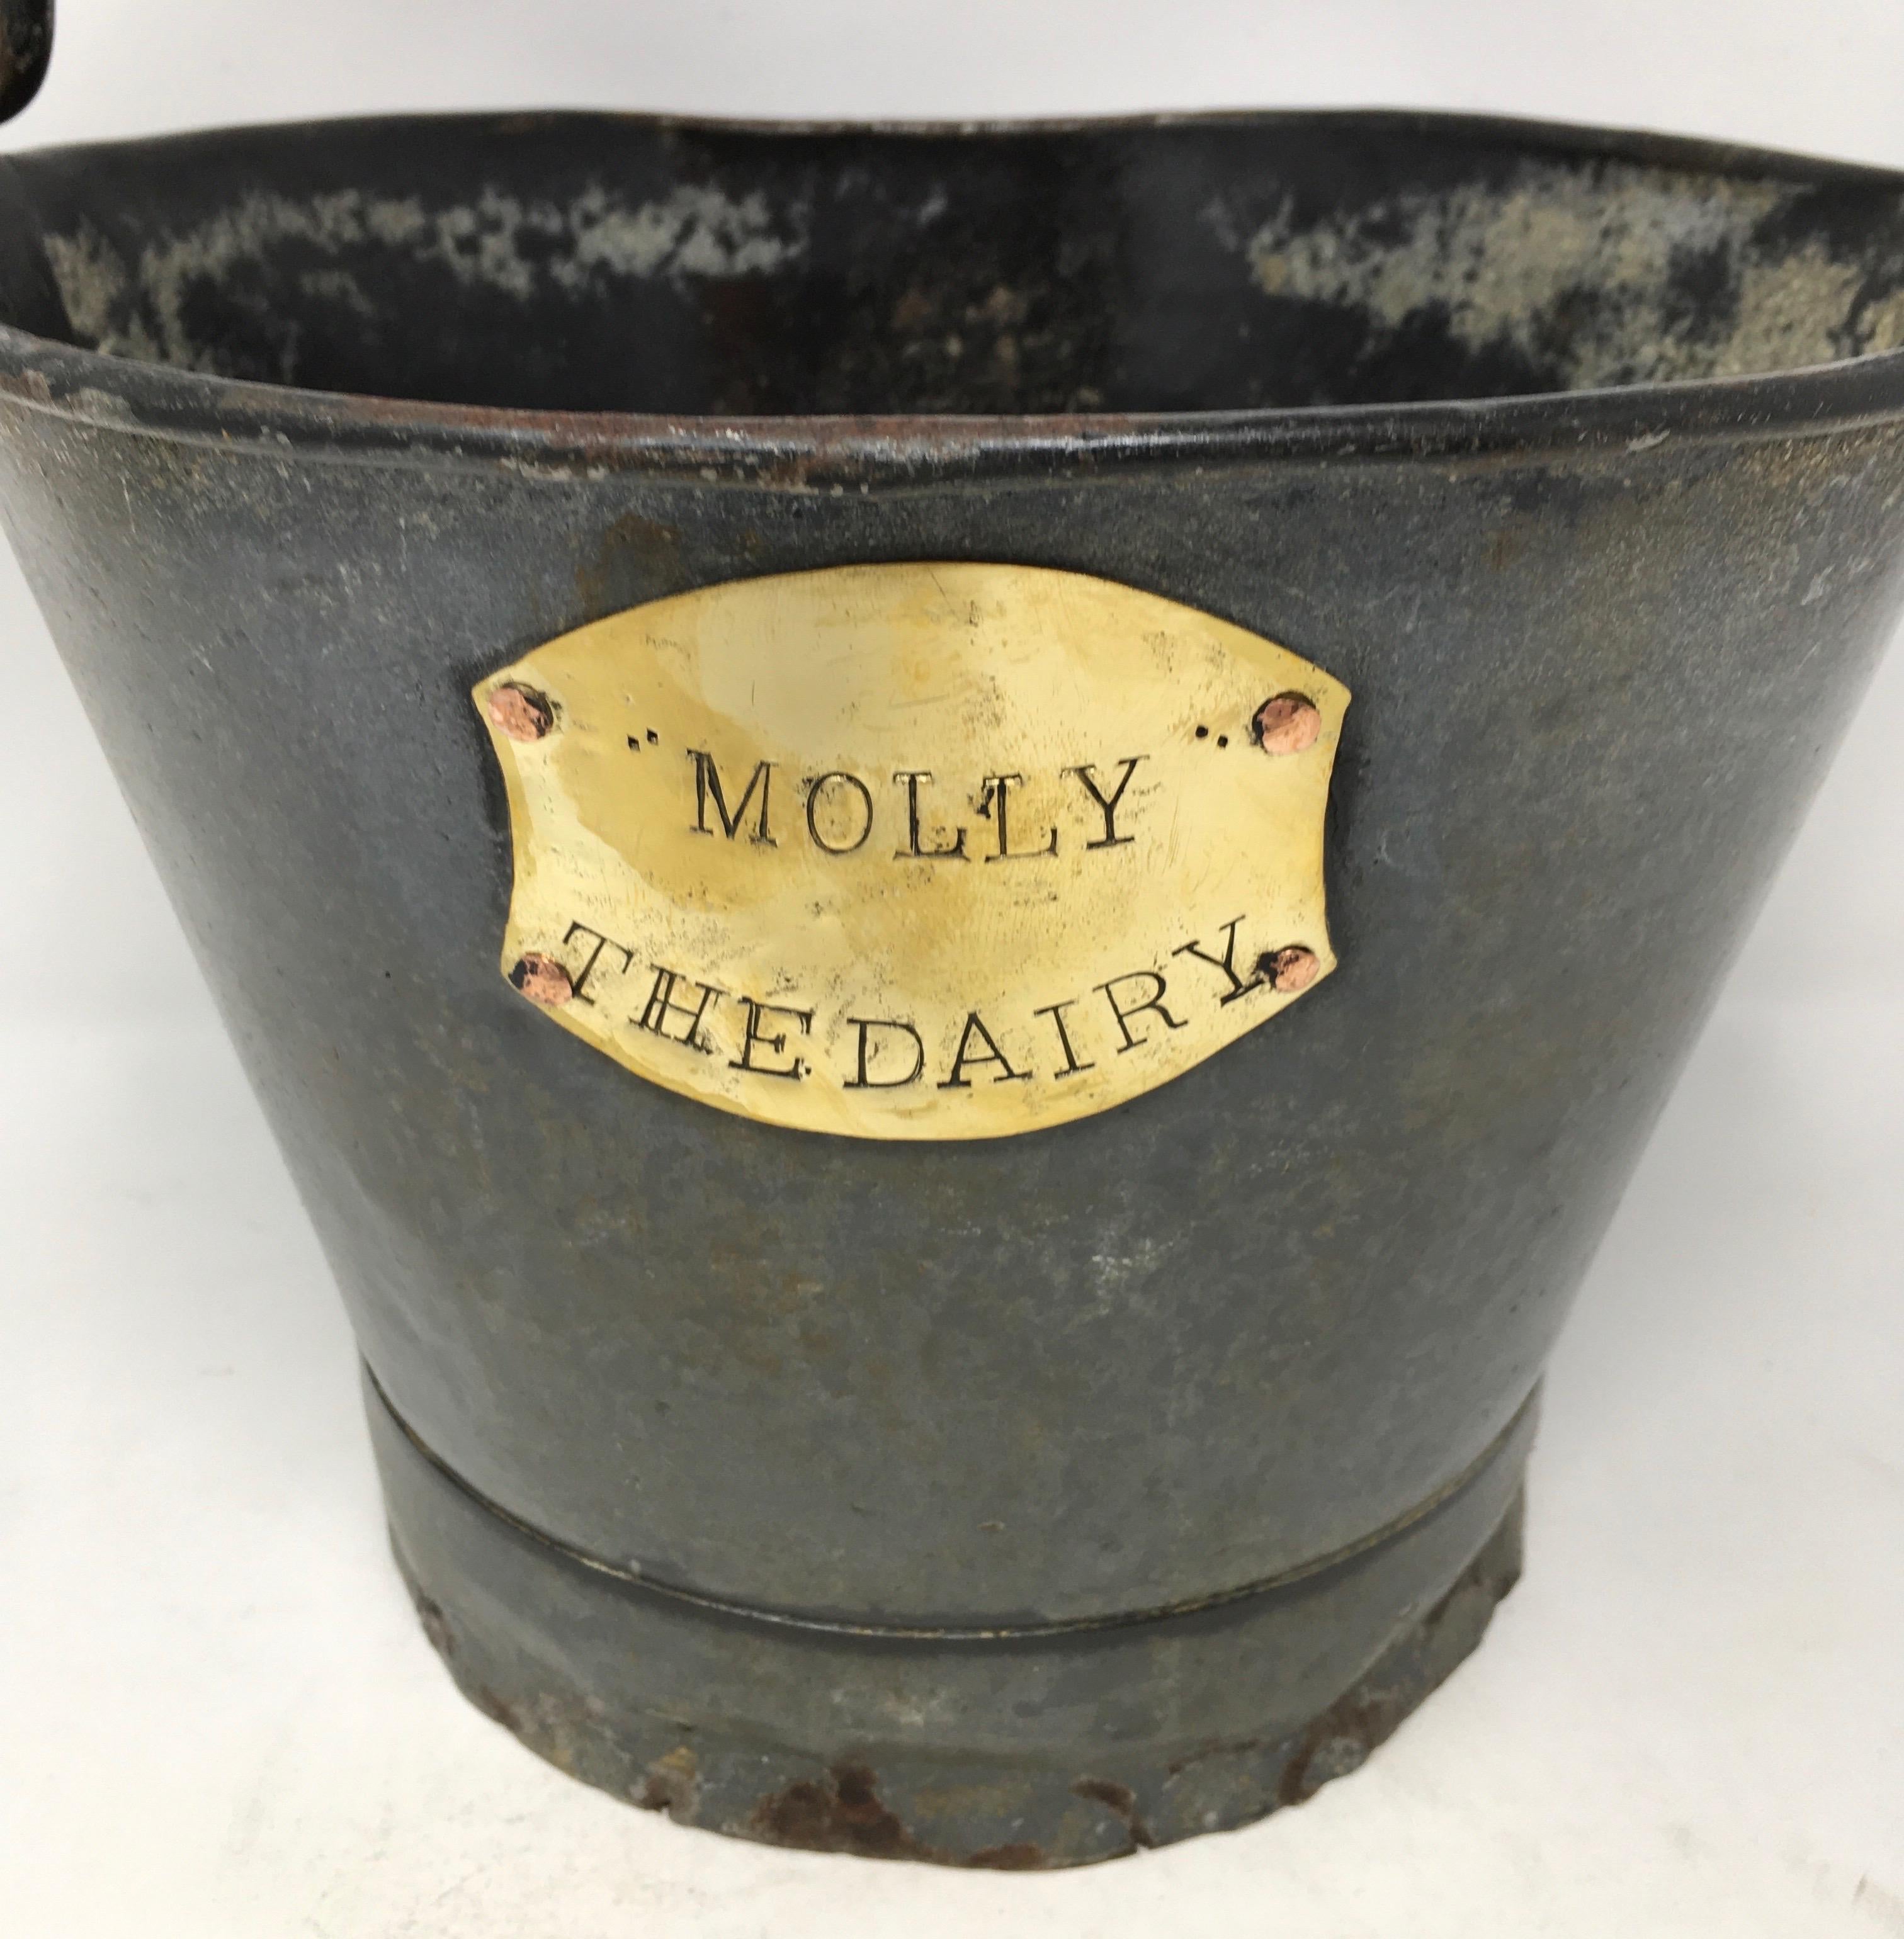 Found in England, this bucket was once used on a dairy farm for a cow named Molly. Today it could be used to add English charm to your home or outdoor setting.

This piece weighs 2 lb.